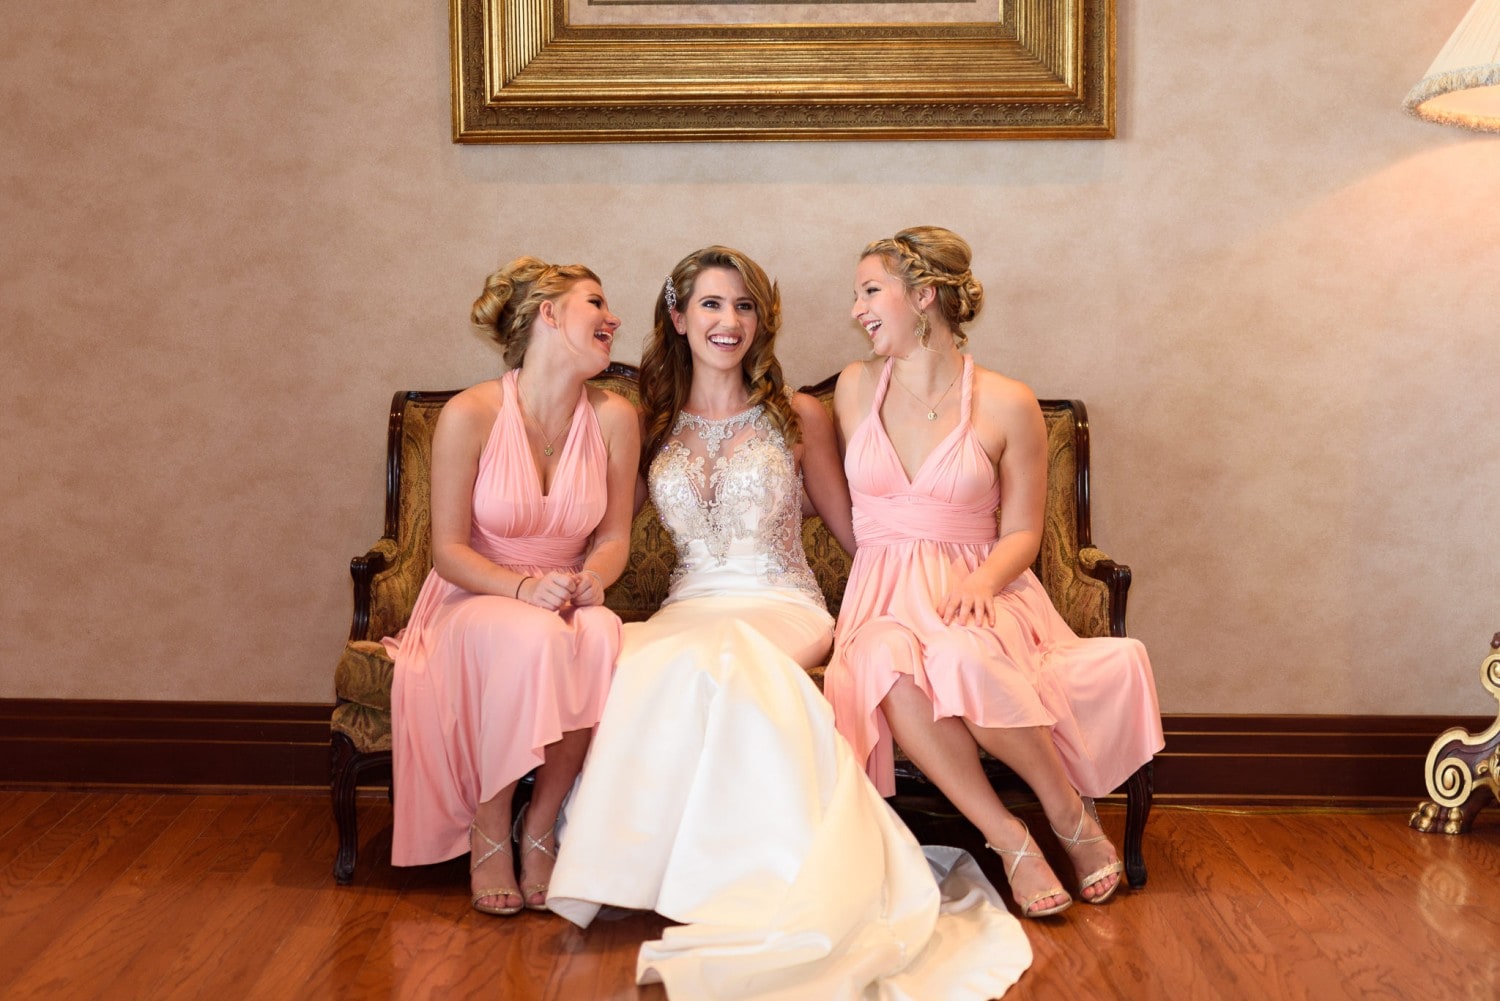 Bride with bridesmaids laughing on the couch - Grande Dunes Ocean Club - Myrtle Beach